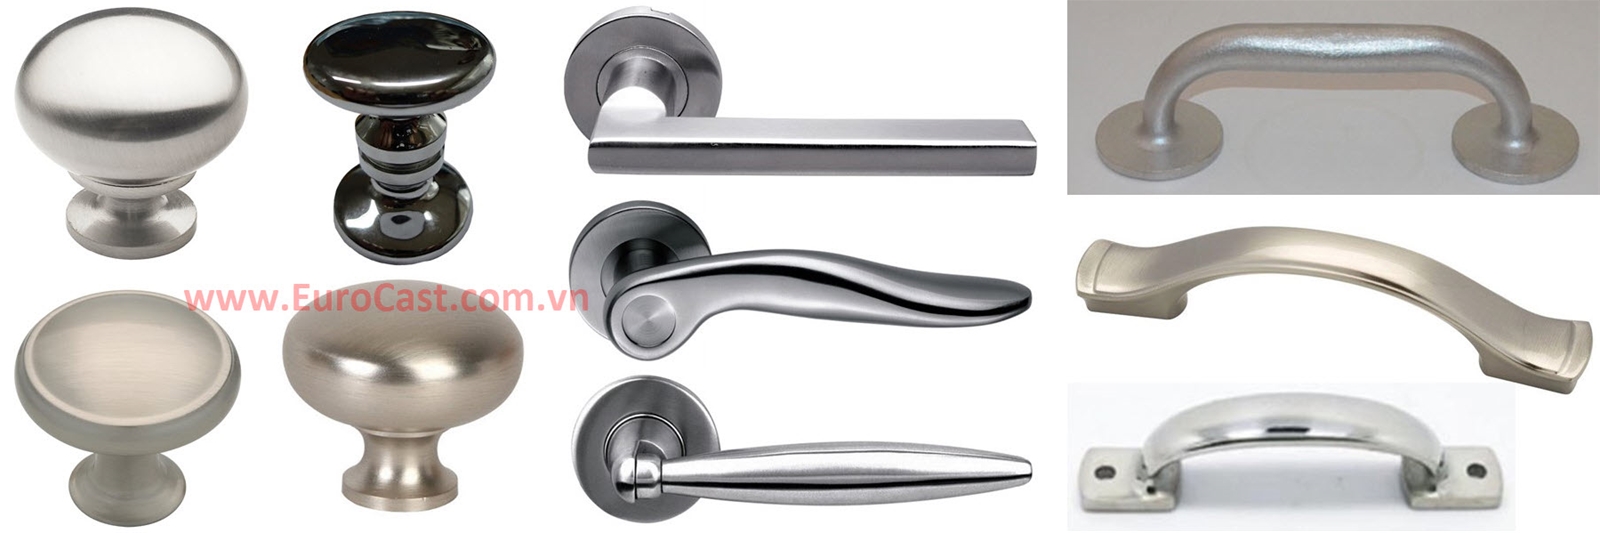 Door handles by investment casting